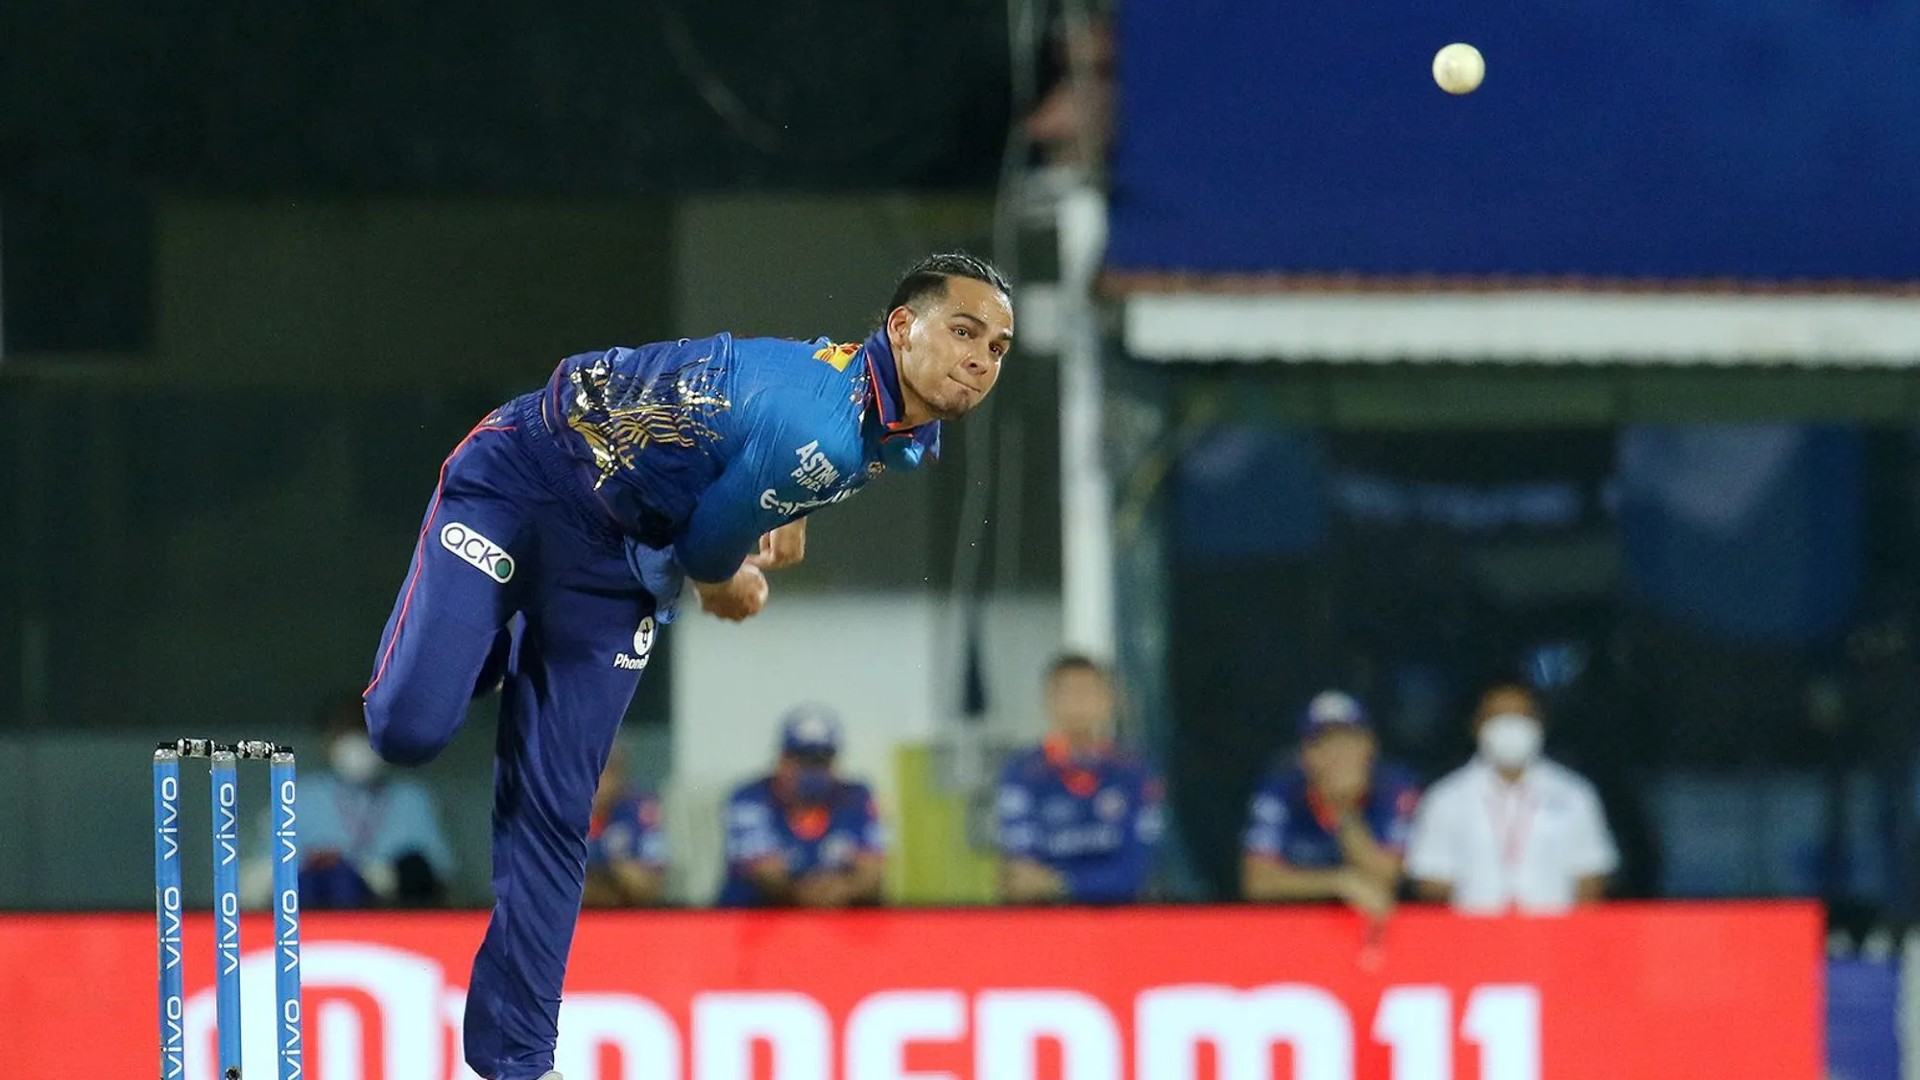 IPL 2021: Rahul Chahar in his delivery stride. (Image: BCCI/IPL)